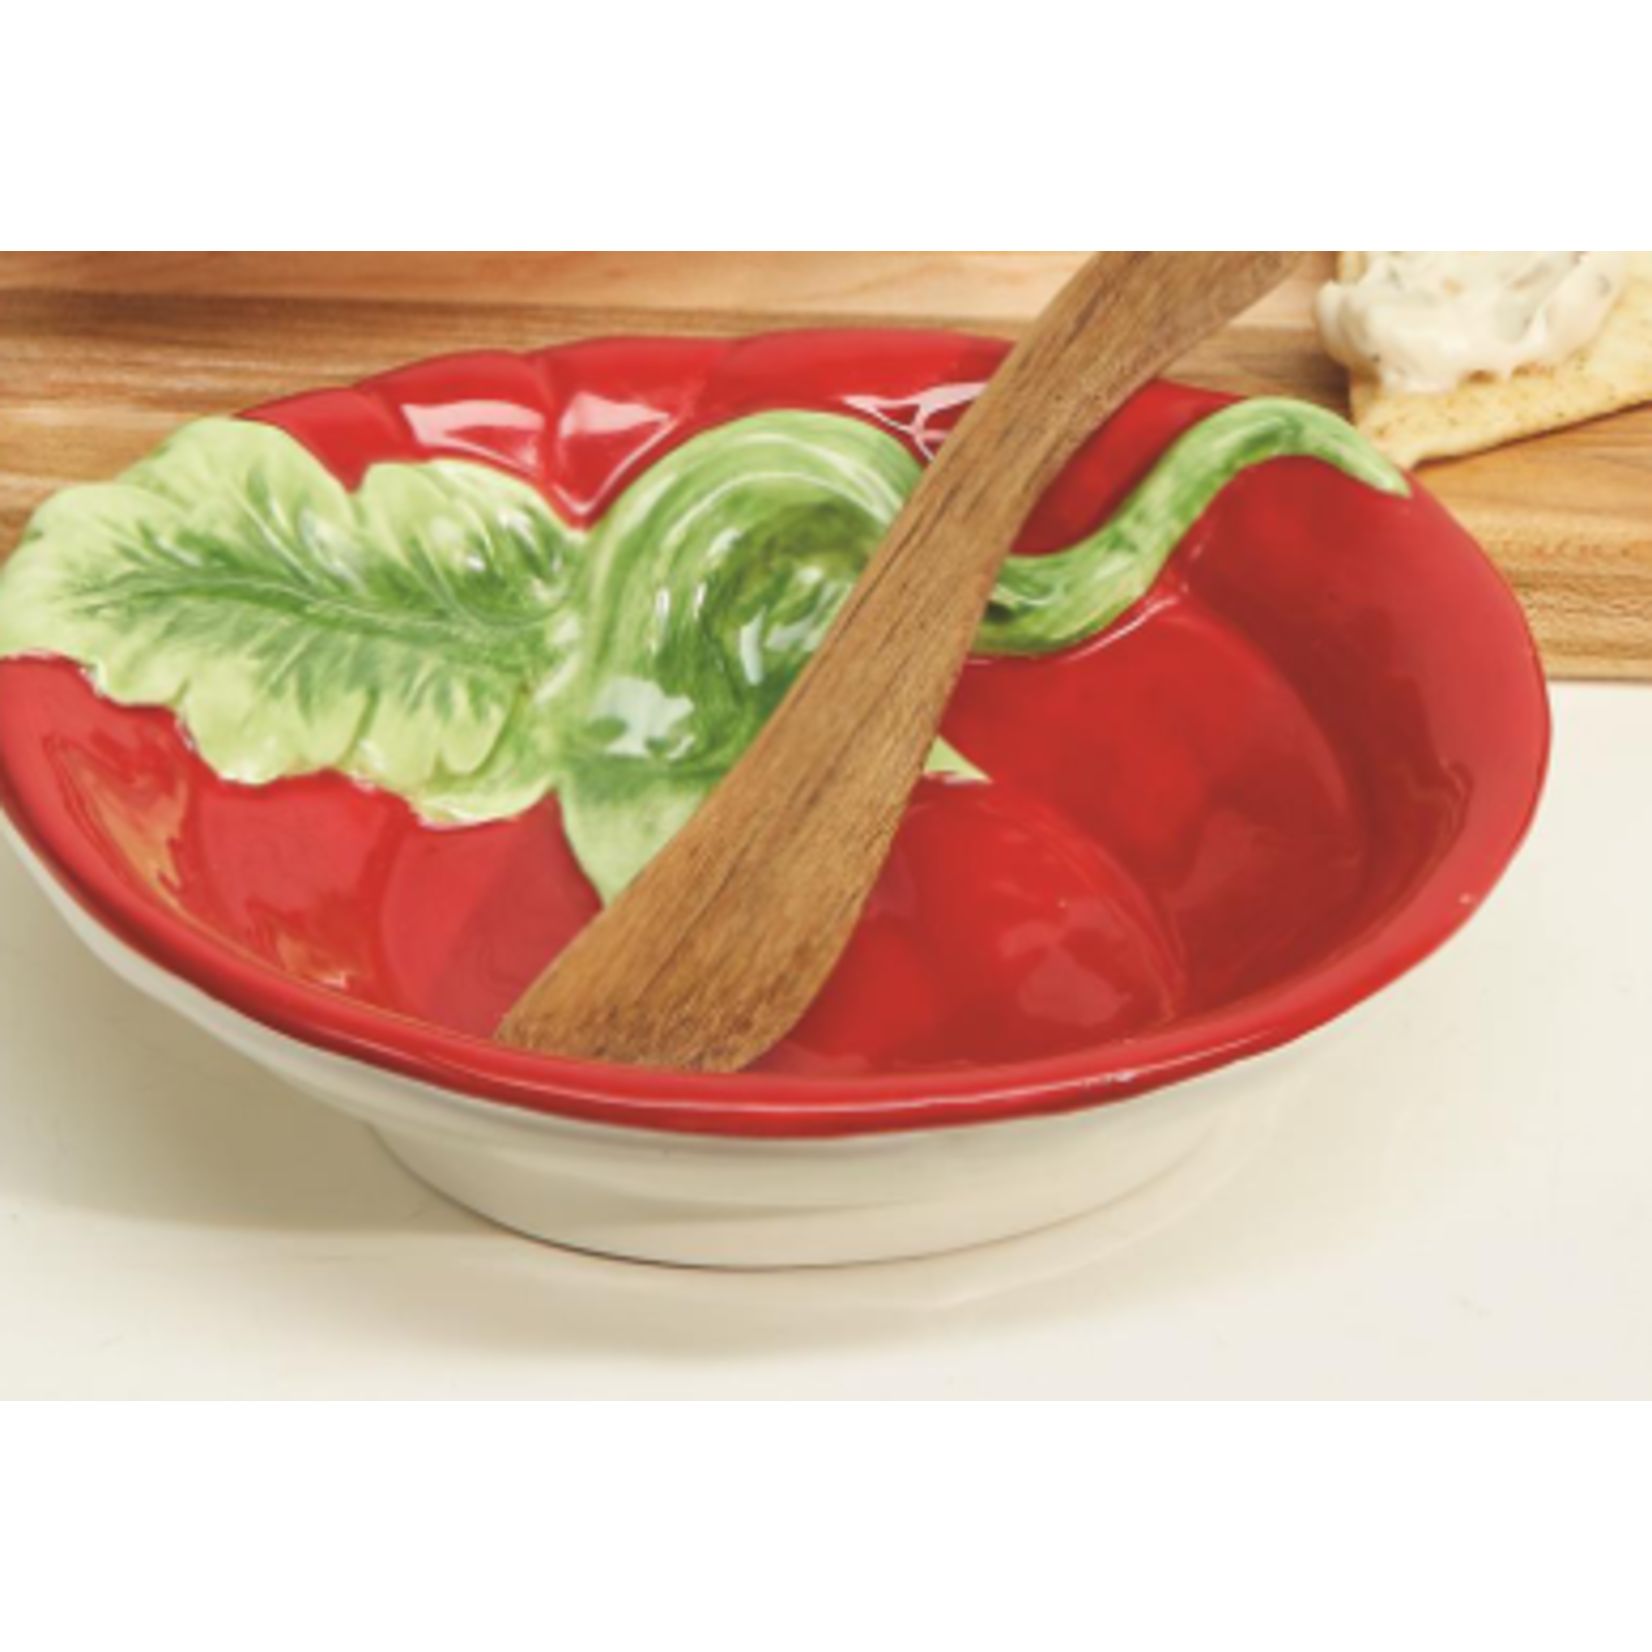 Two's Company Vegetable Tidbit Bowl with Spreader